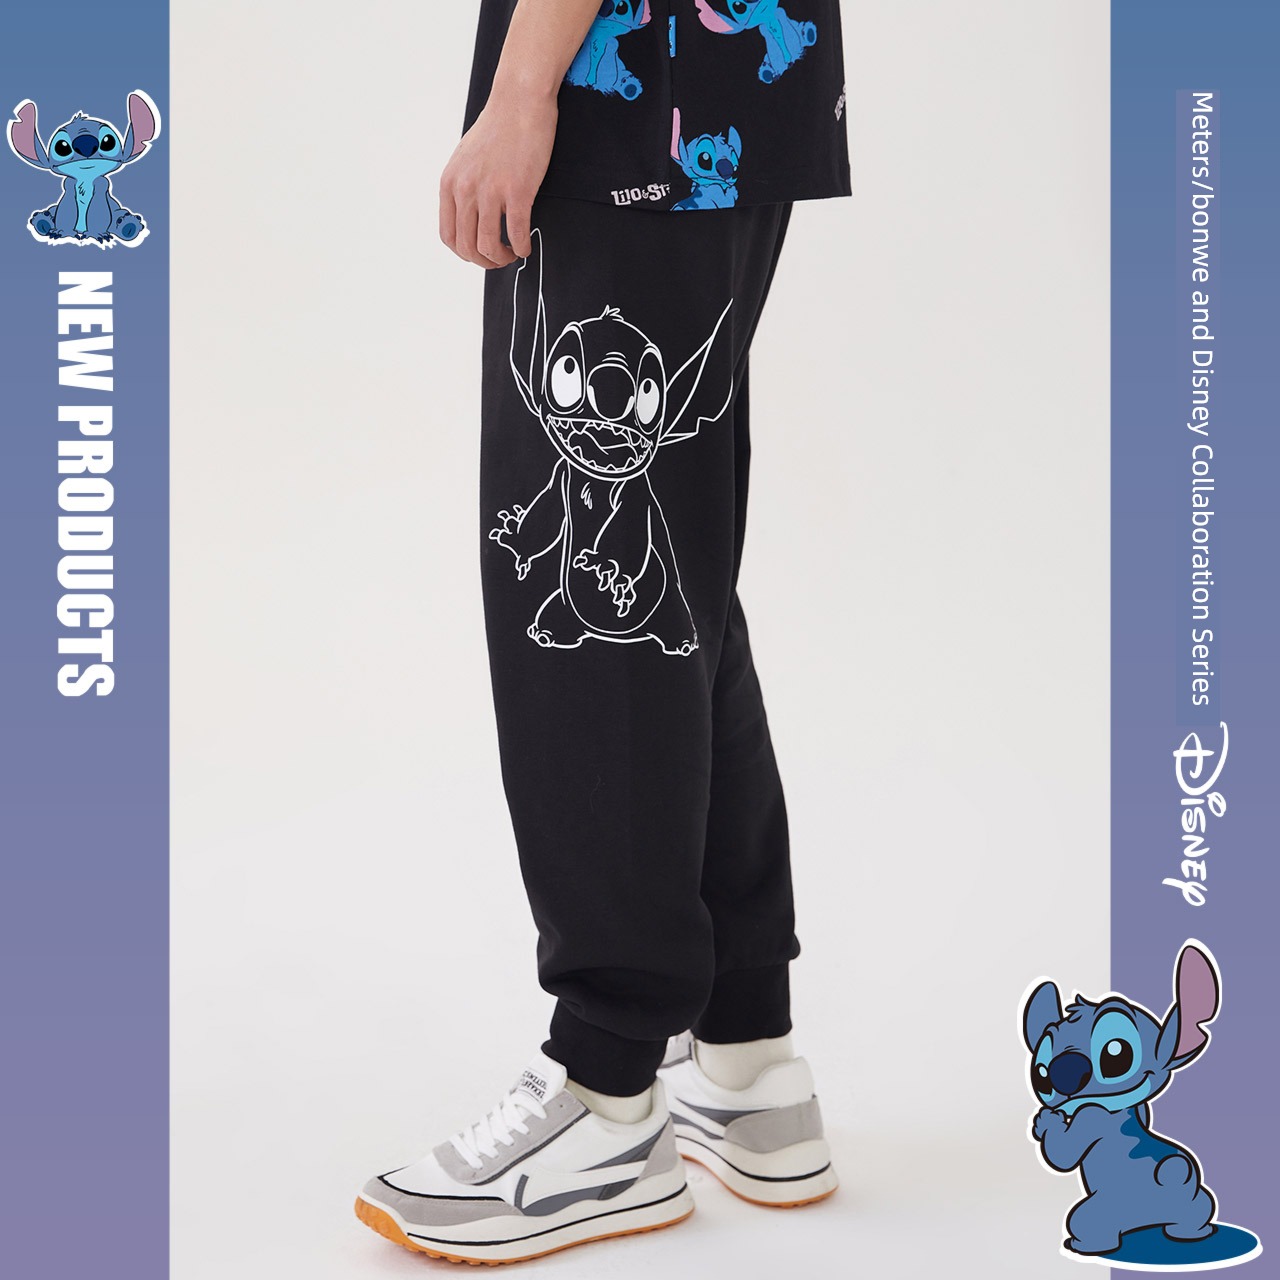 Mets bonway Steve jointly fashion Sports pants